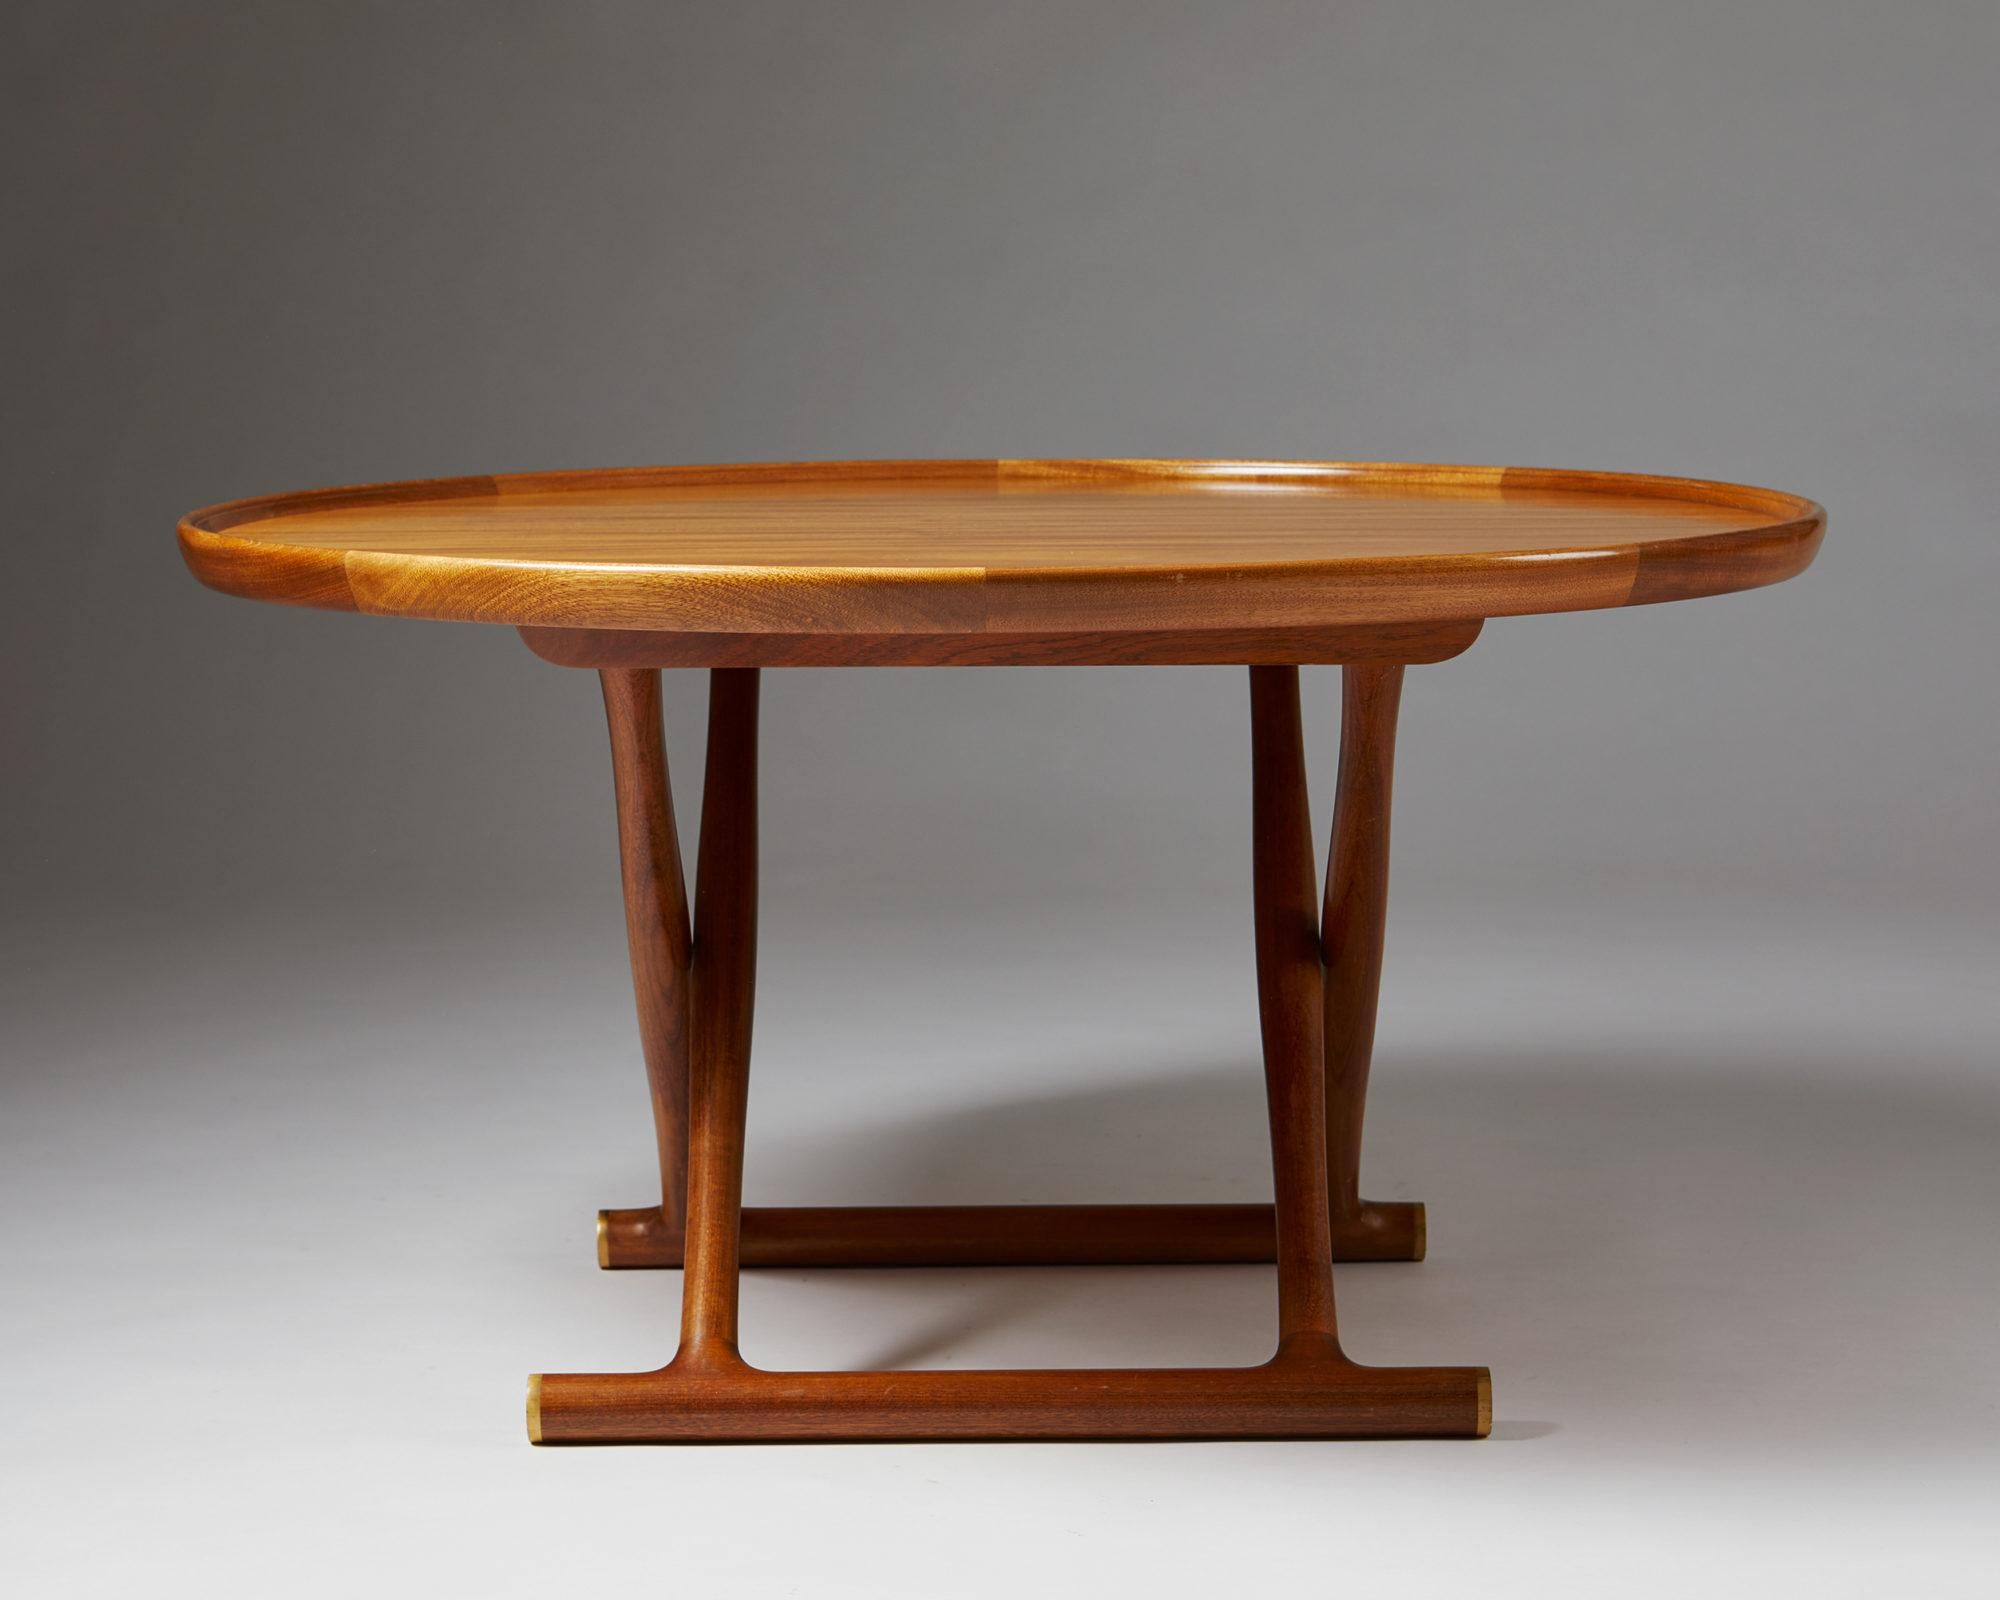 Mid-20th Century Occasional Table “Egyptian Table” Designed by Mogens Lassen, Denmark, 1940s